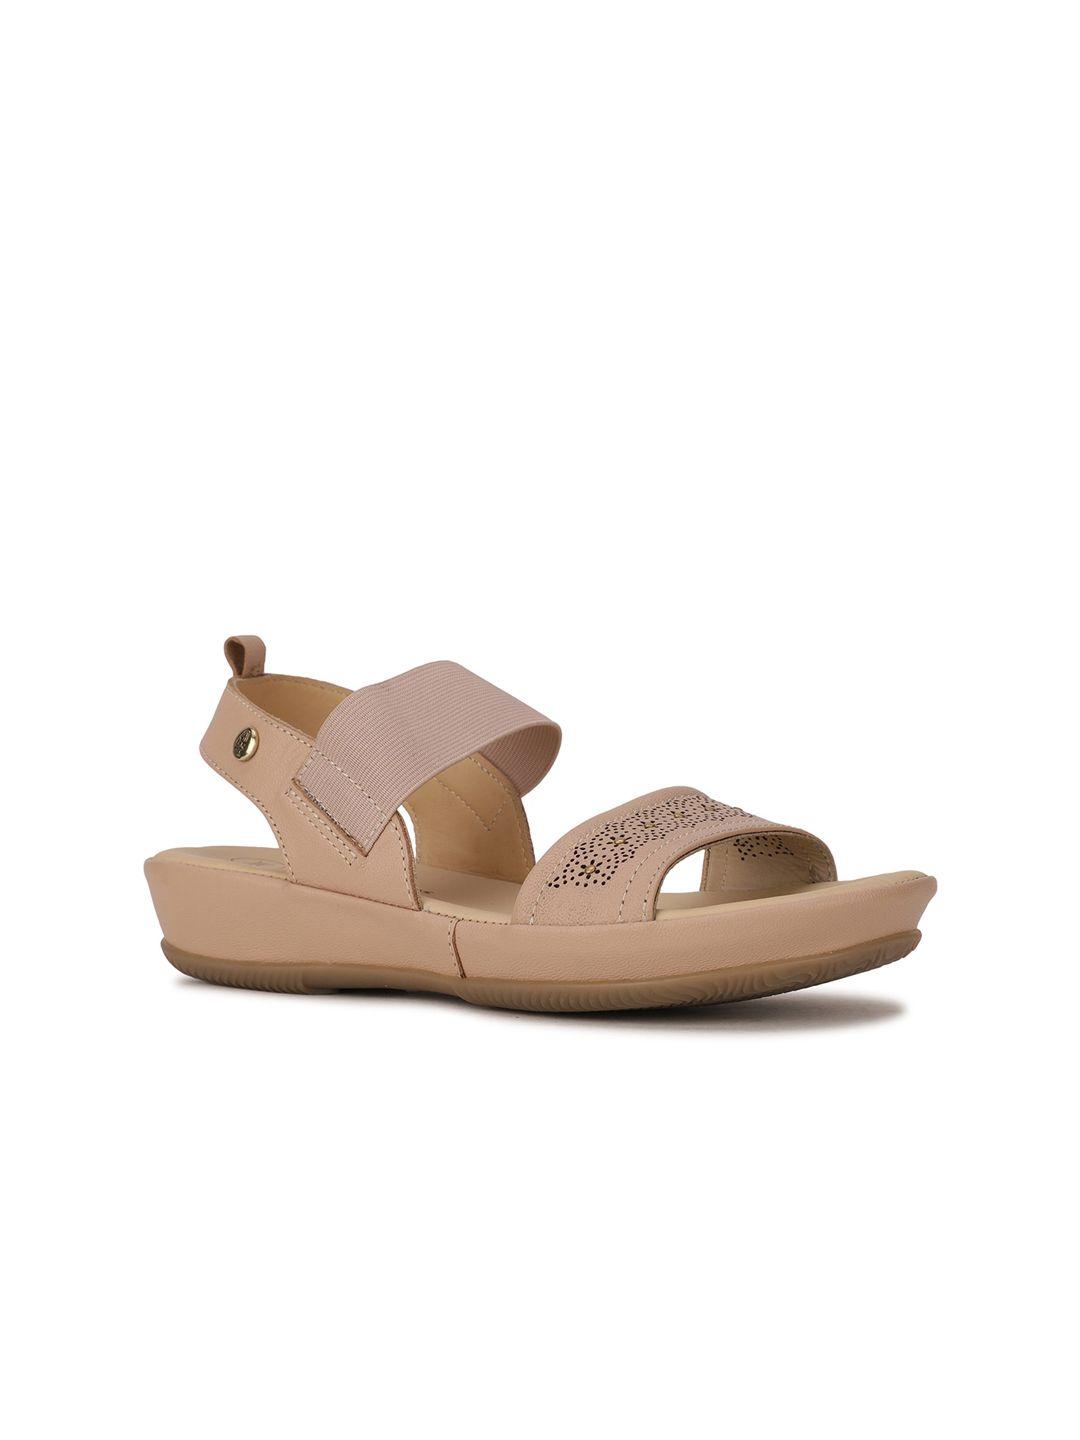 hush-puppies-beige-wedge-sandals-with-laser-cuts